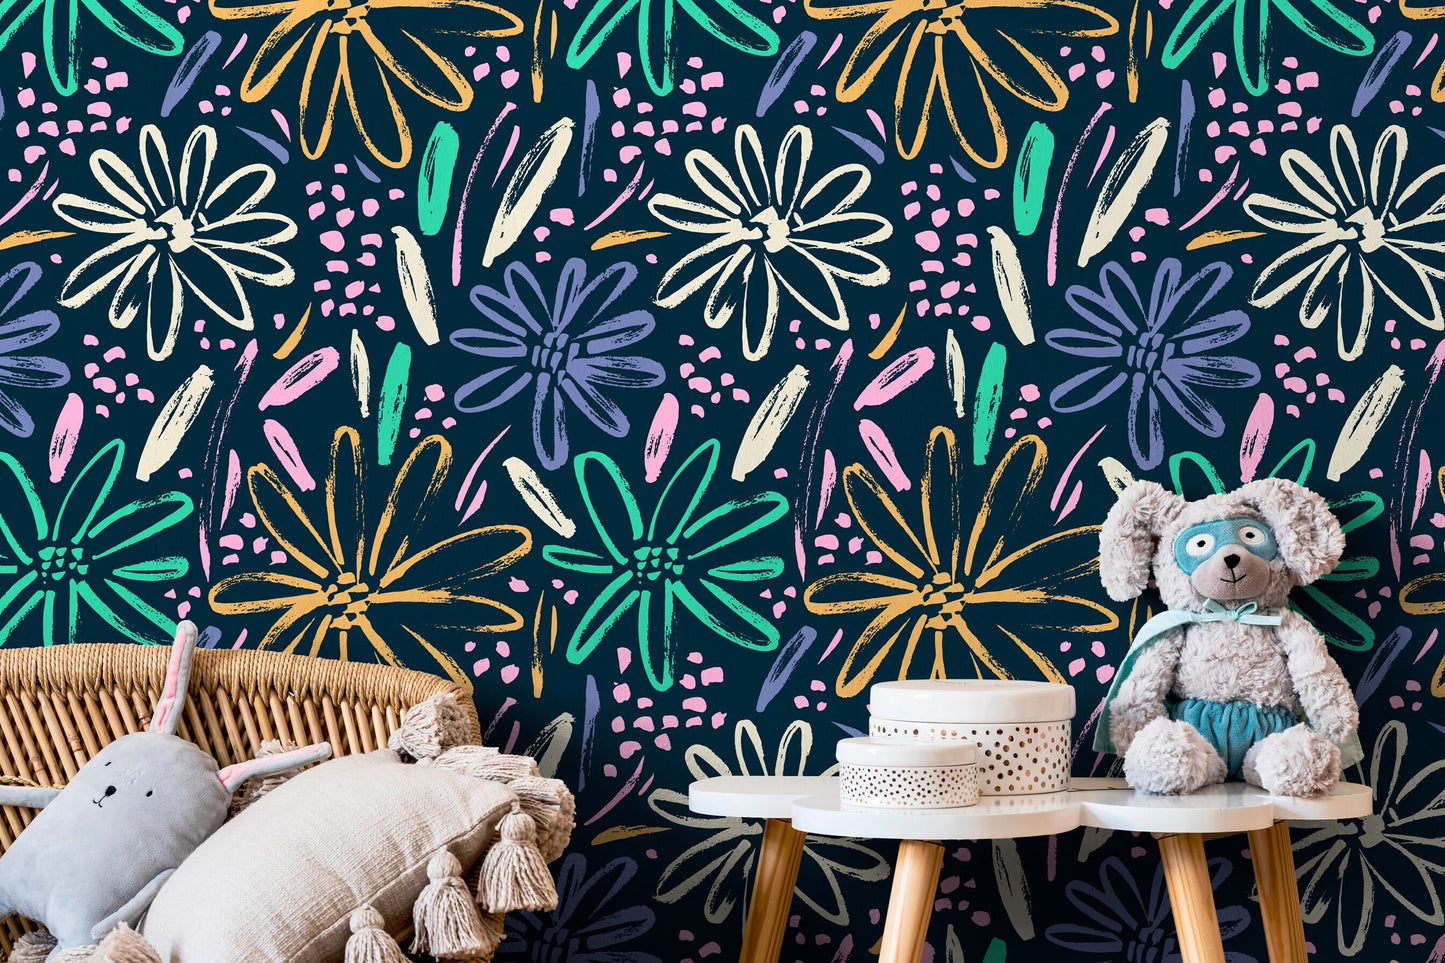 Hand-drawn Flowers Wallpaper - Removable Wallpaper Peel and Stick Wallpaper Wall Paper Wall - B332